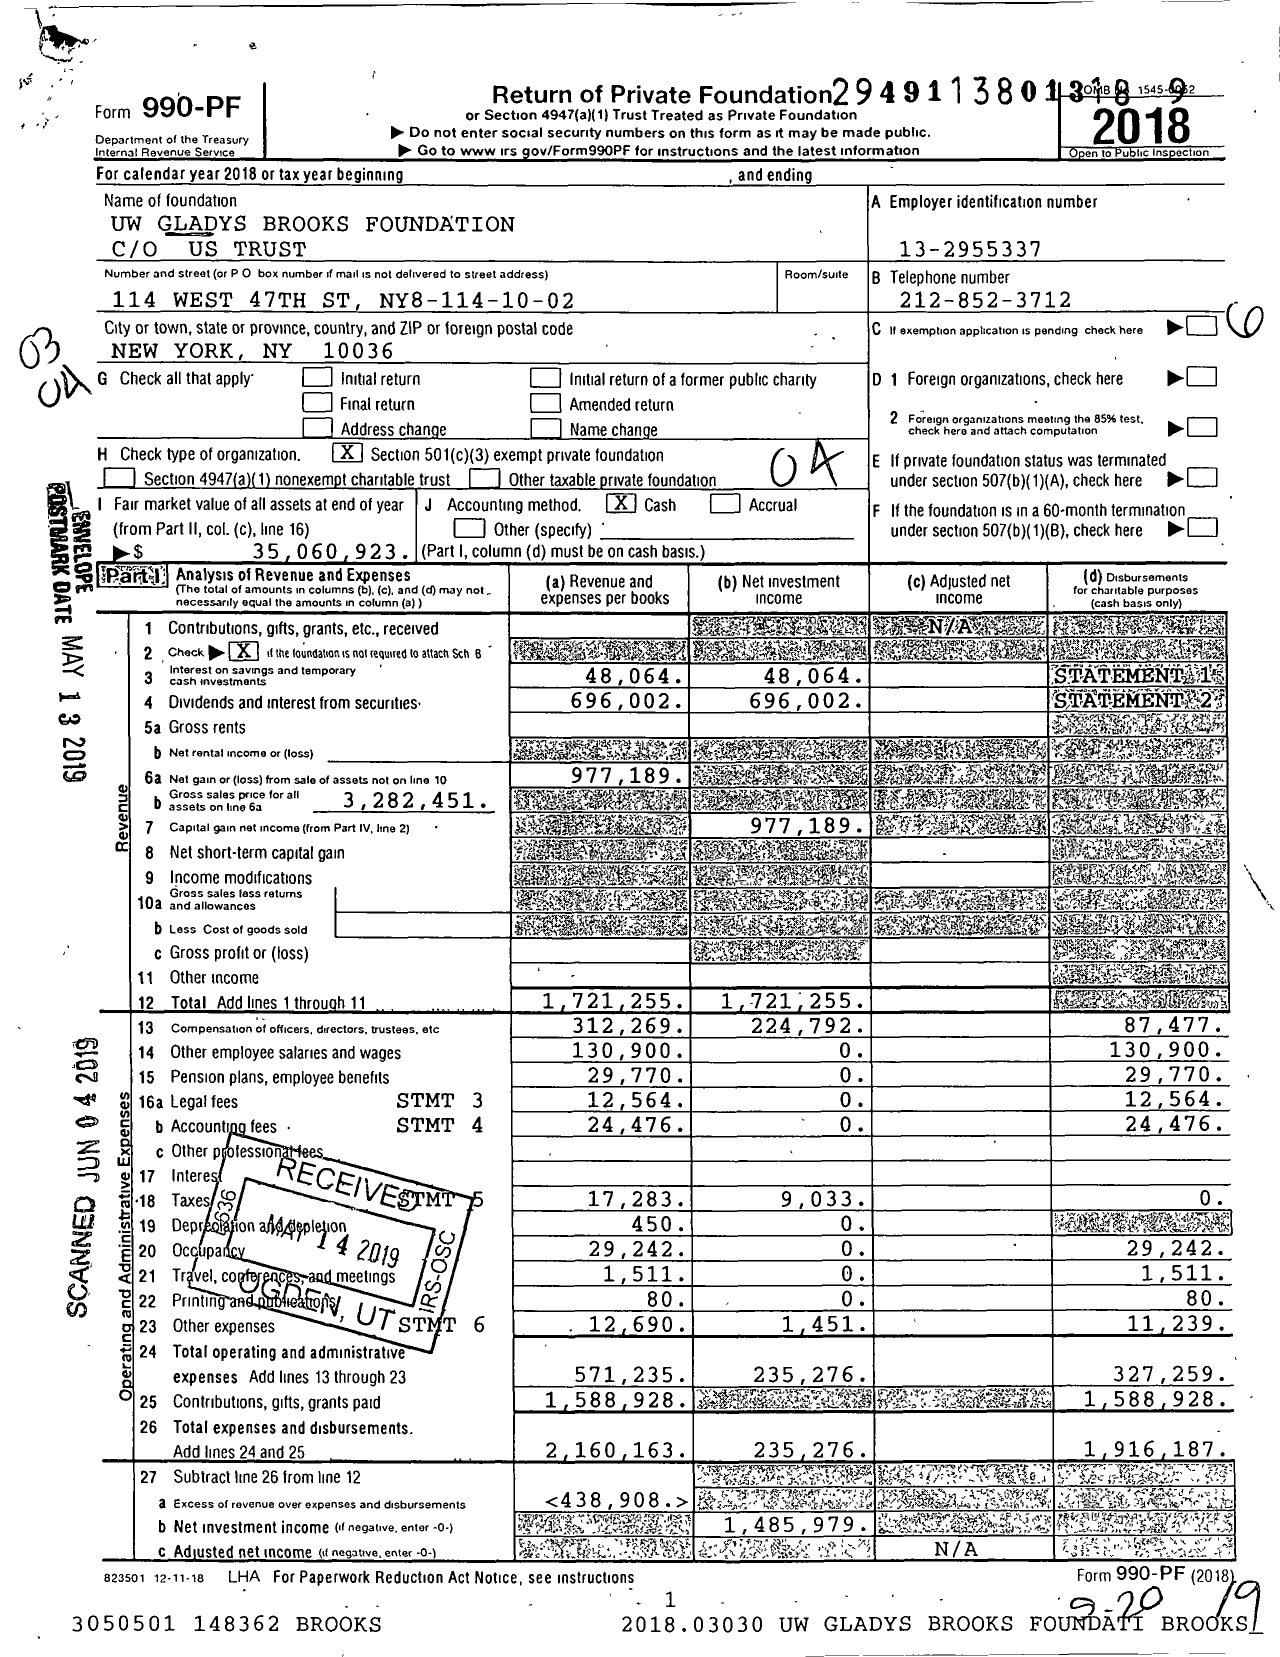 Image of first page of 2018 Form 990PF for Uw Gladys Brooks Foundation